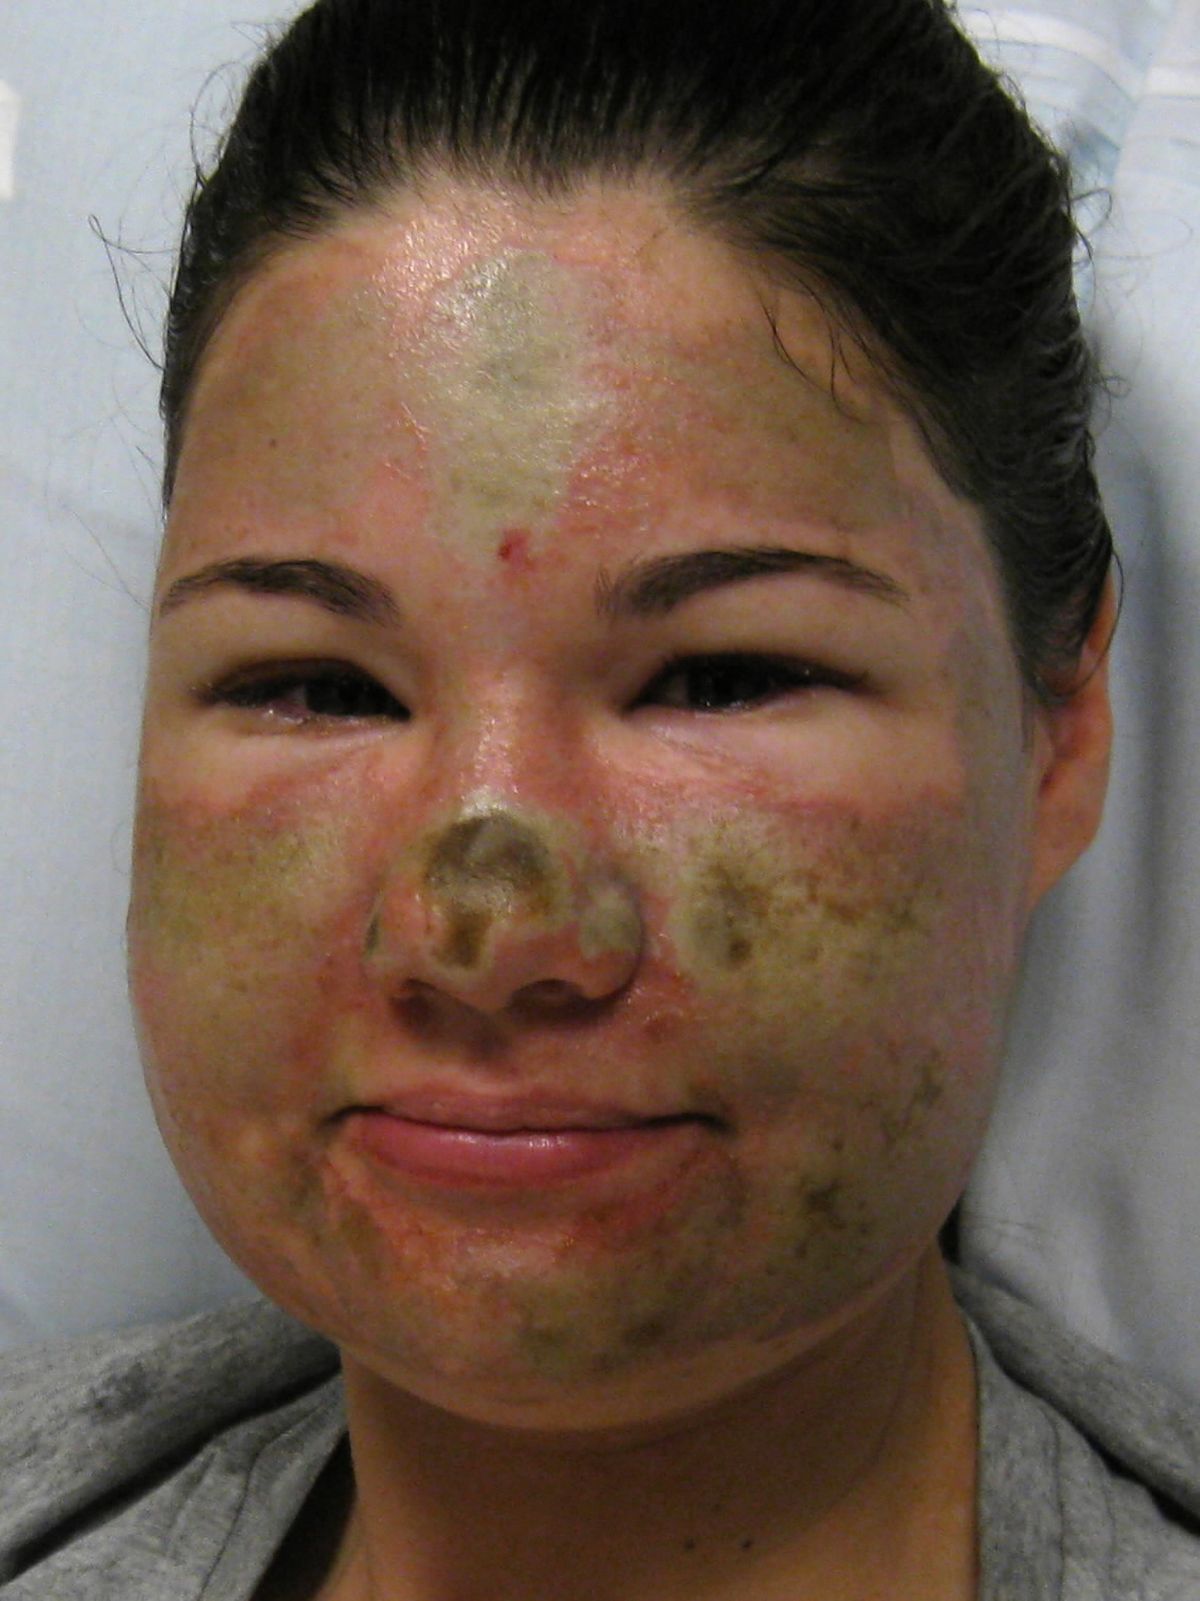 This image provided by the Legacy Emanuel Medical Center shows Bethany Storro prior to surgery in Portland. (Legacy Emanuel Medical Center)